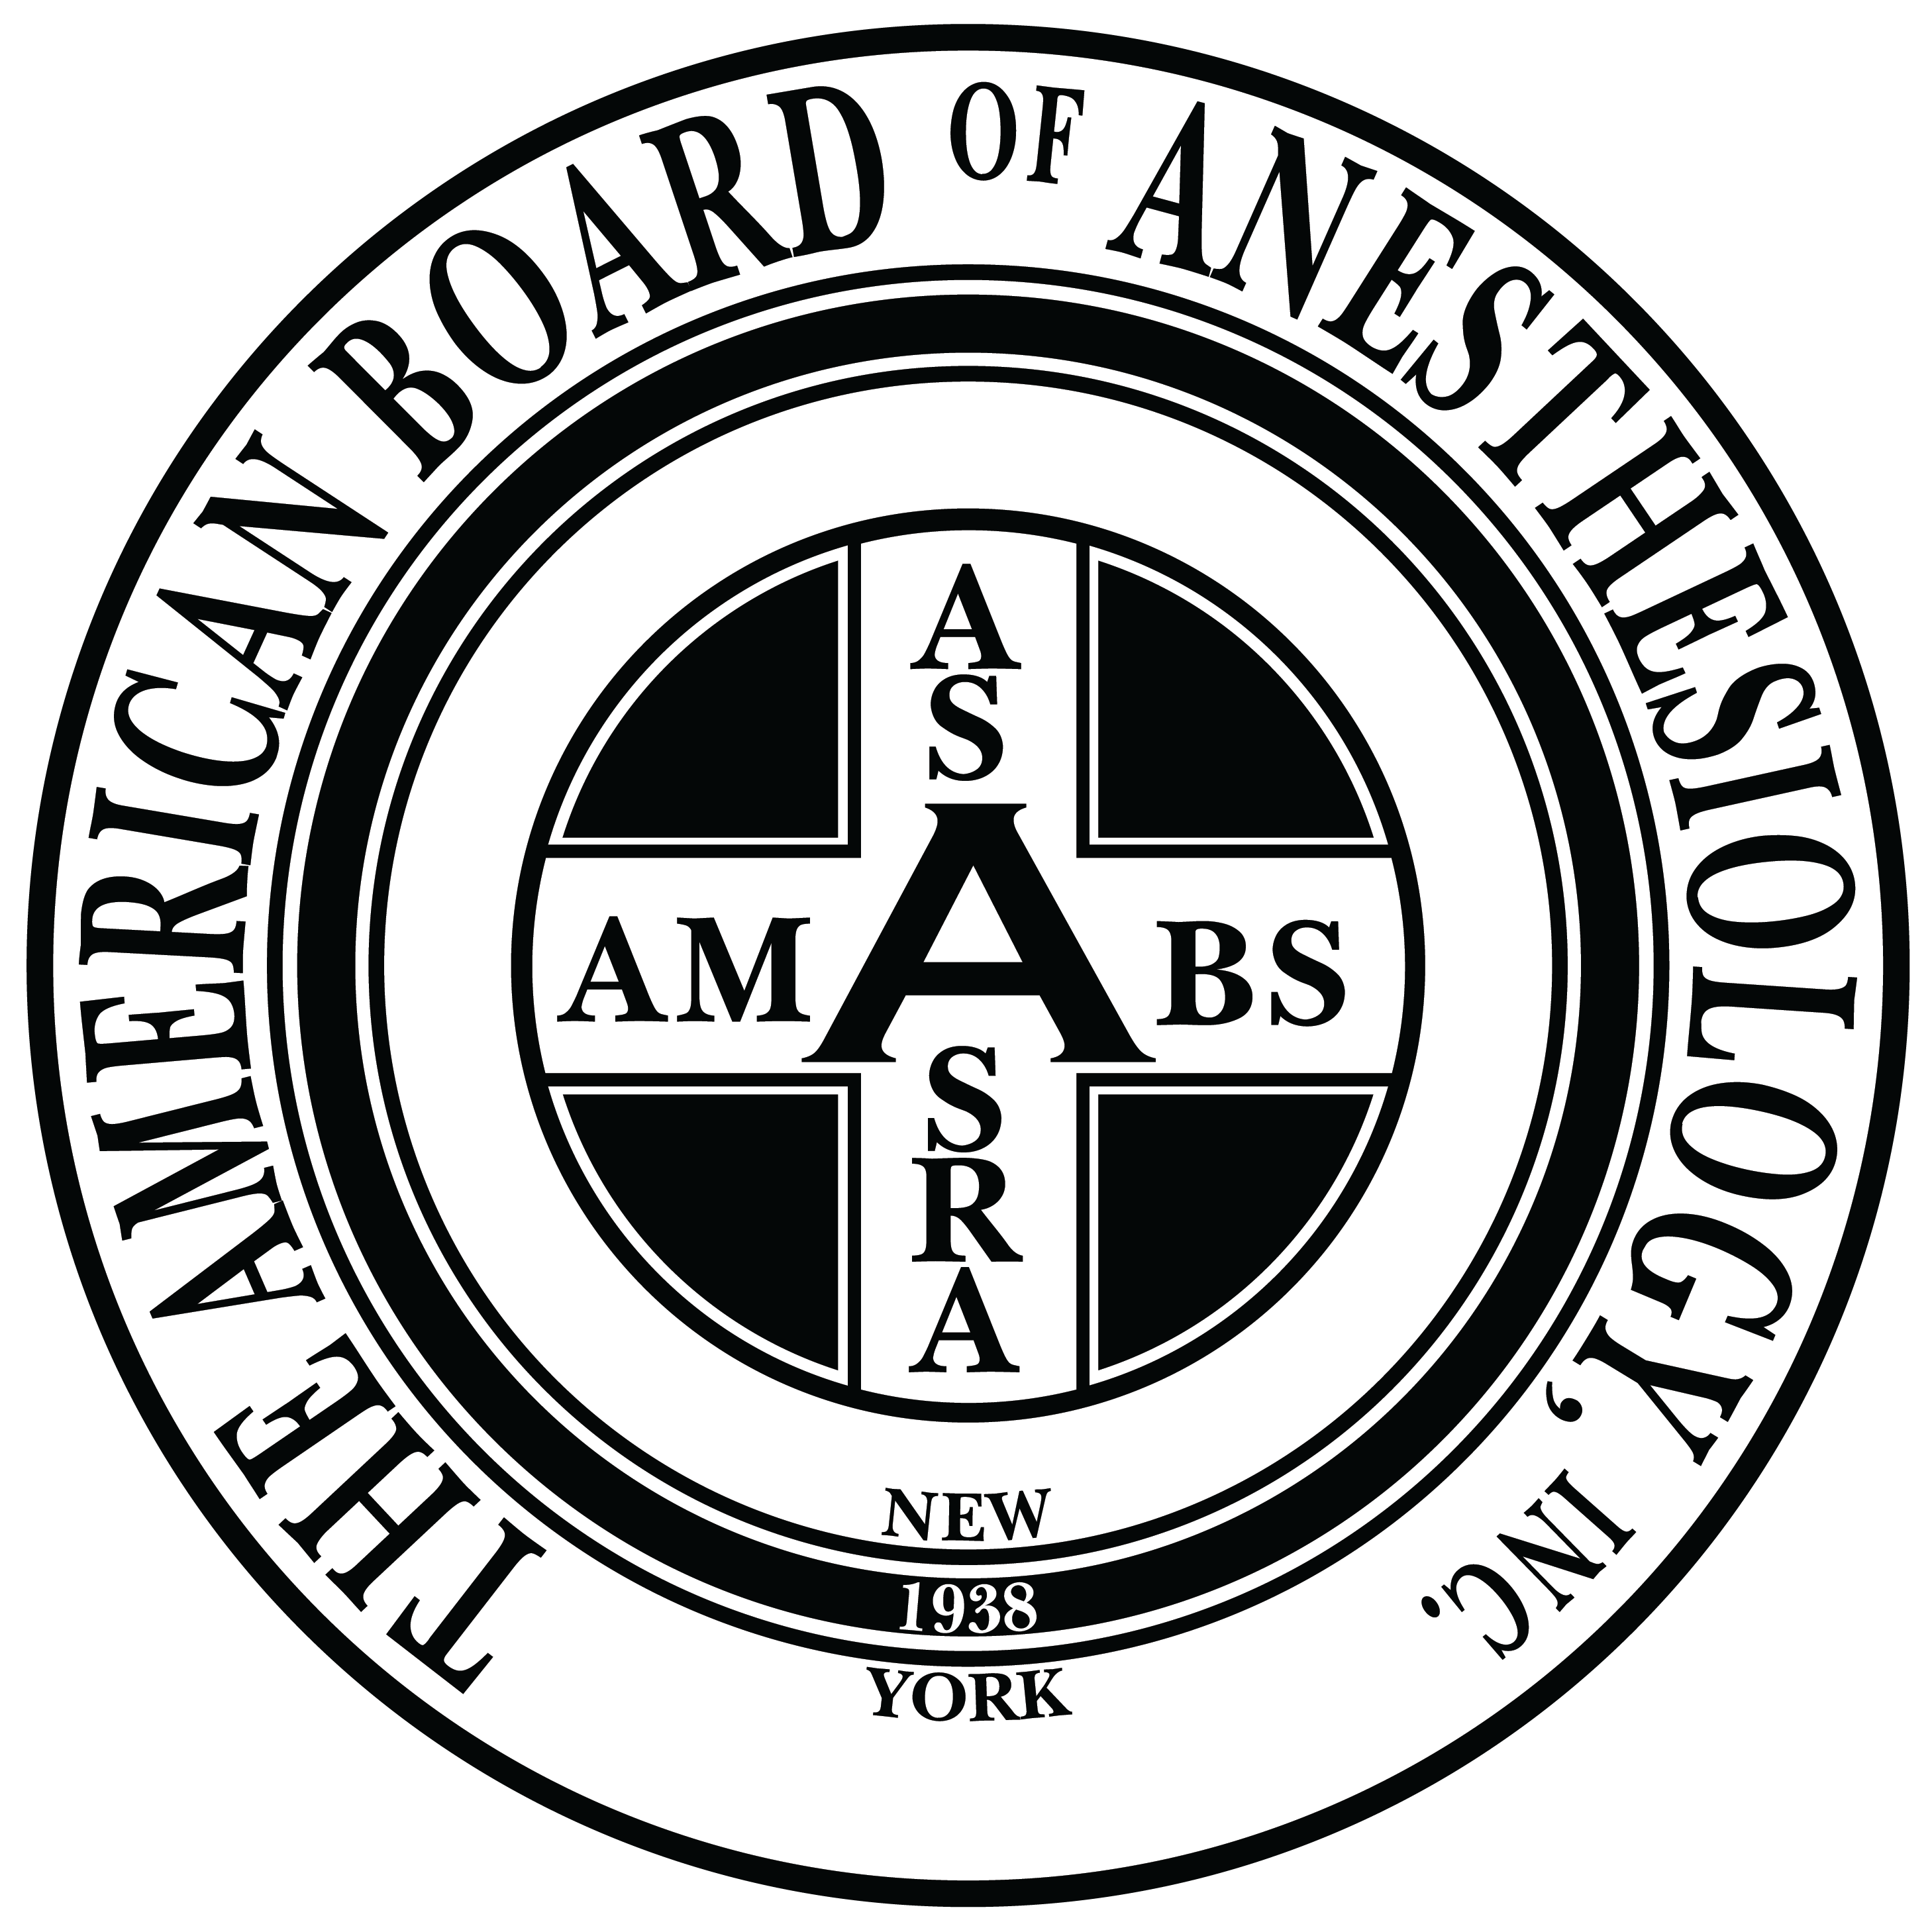 Anesthesiologist Logo - The American Board of Anesthesiology